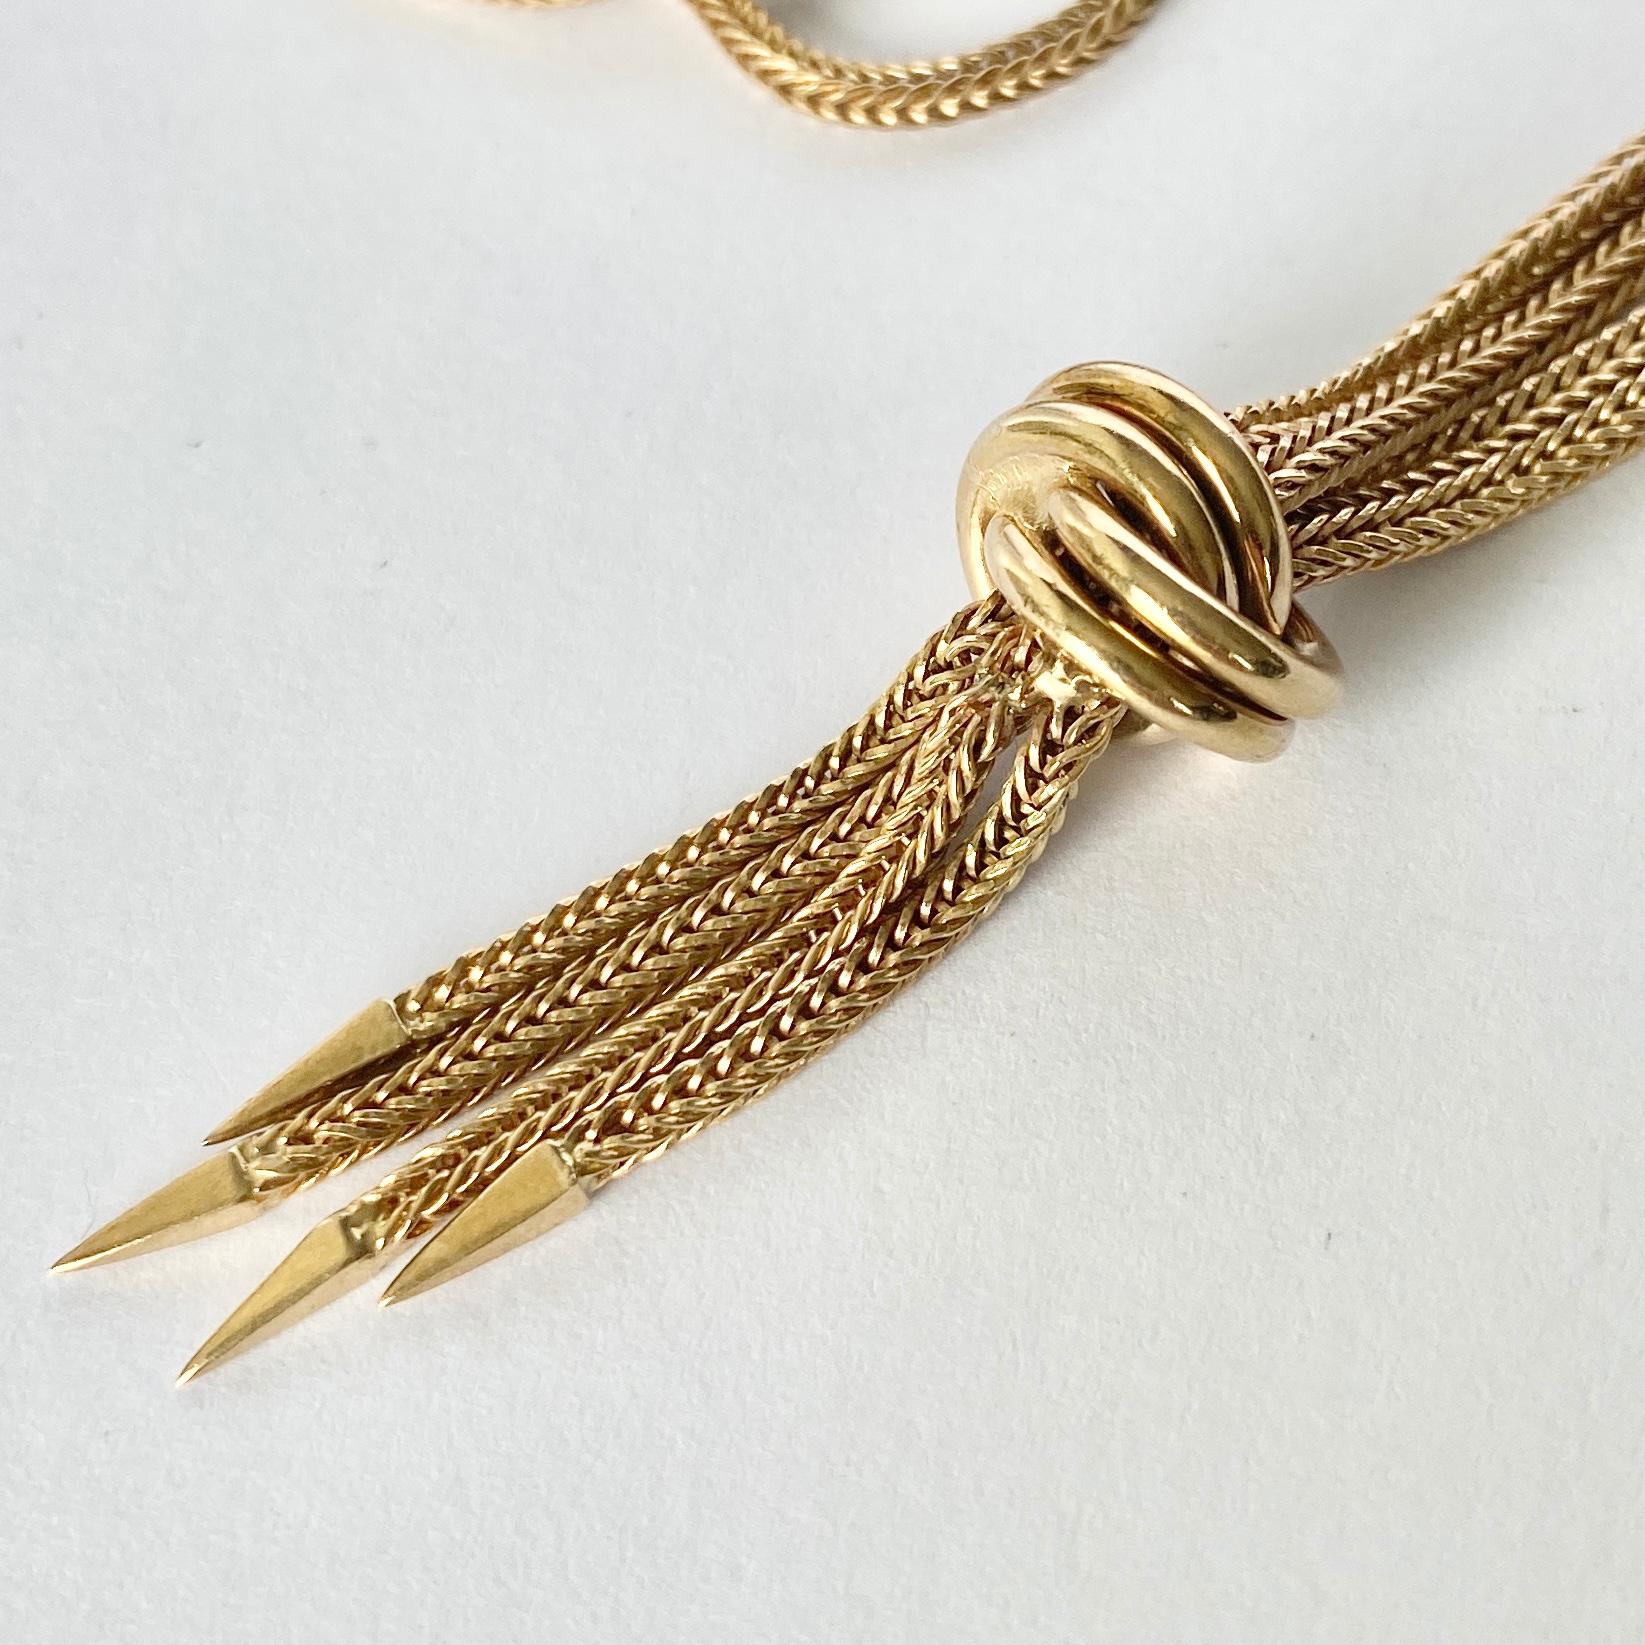 This 9ct yellow gold necklace is made up of snake like link chain and fastens using a bolt clip. At the centre of the chain is a gold knot and then a tassel which falls beautifully from it. 

Length: 41cm 
Chain Width: 2mm 

Weight: 15g